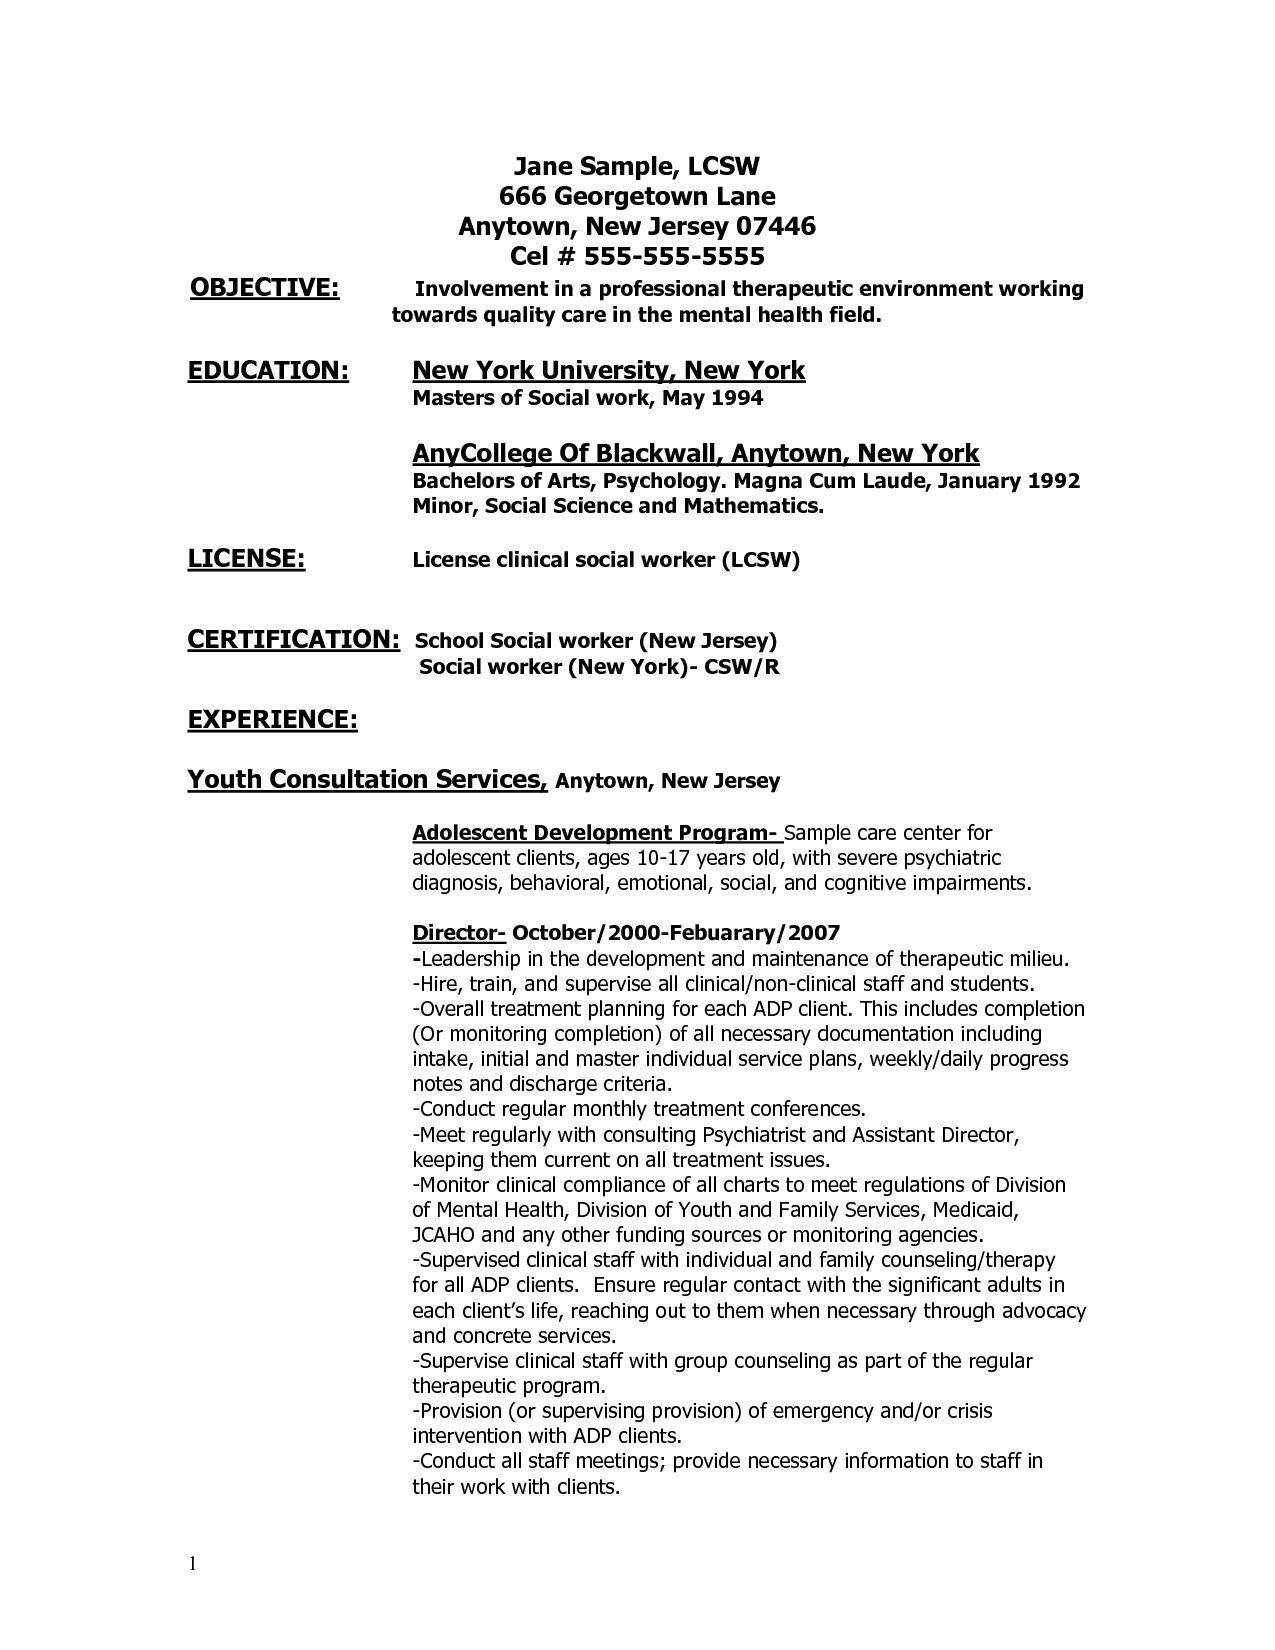 Sample social Work Resume Objective Statements 75 Inspiring Photos Of Resume Objective Examples for An Internship …